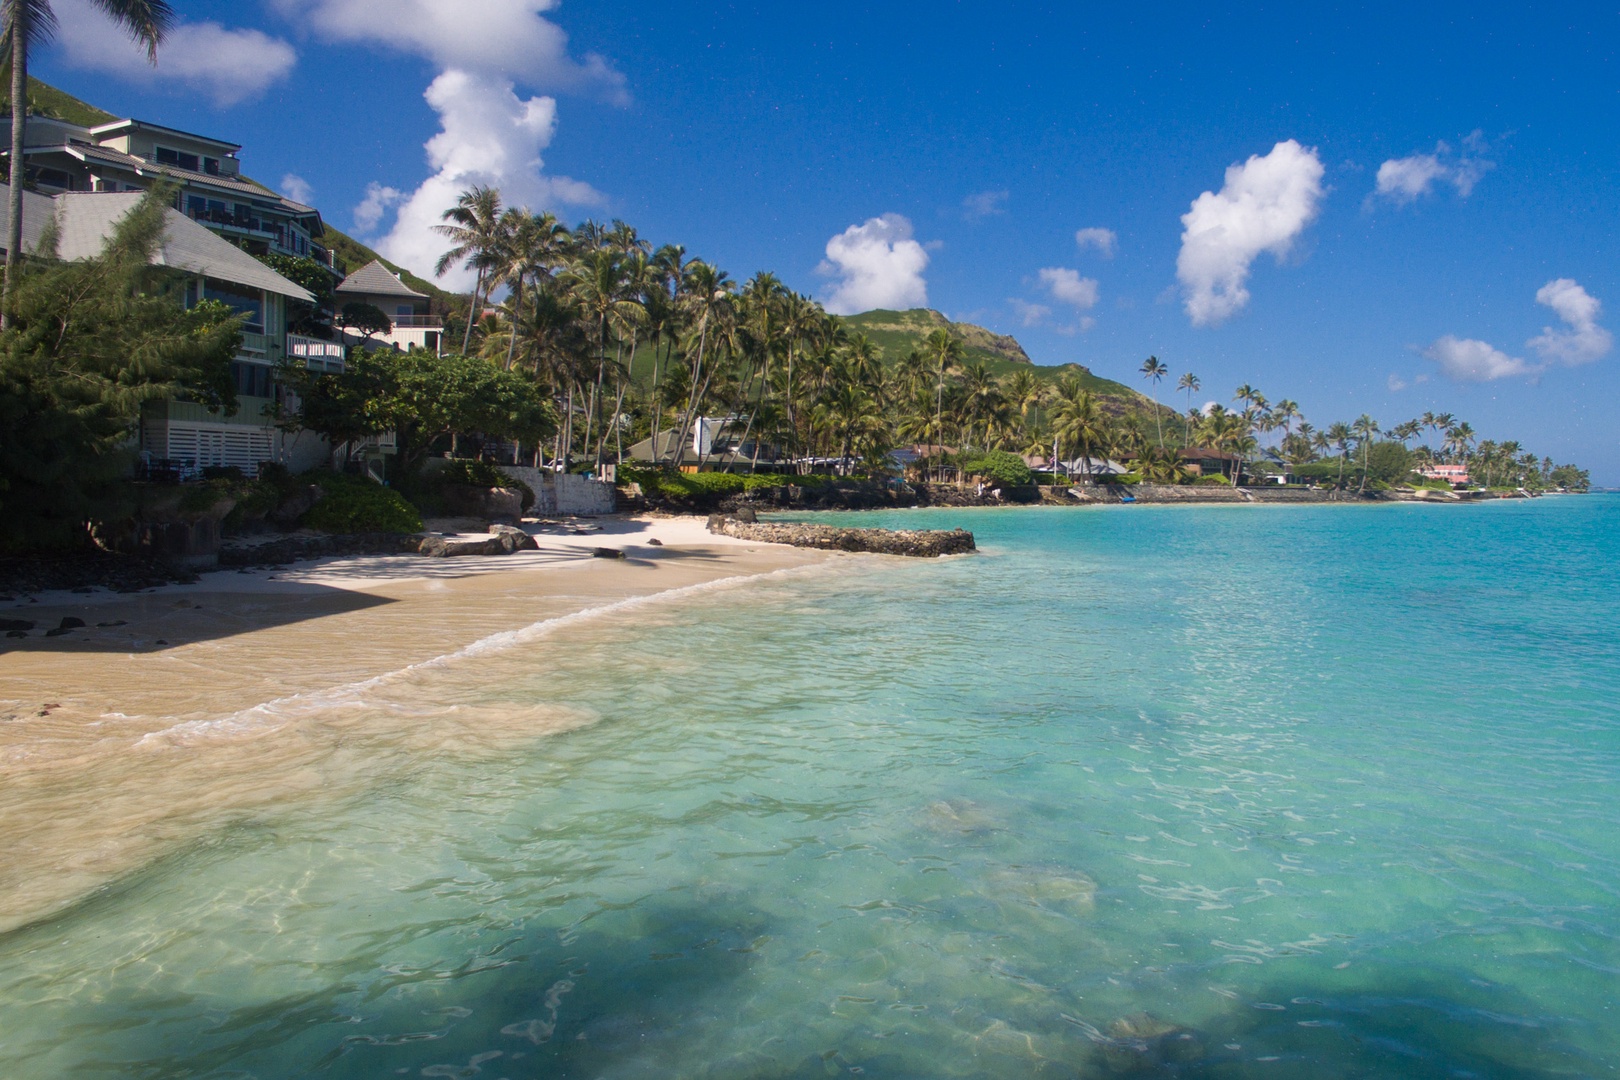 Kailua Vacation Rentals, Hale Mahina Lanikai* - The tranquility of this secluded beach cove.